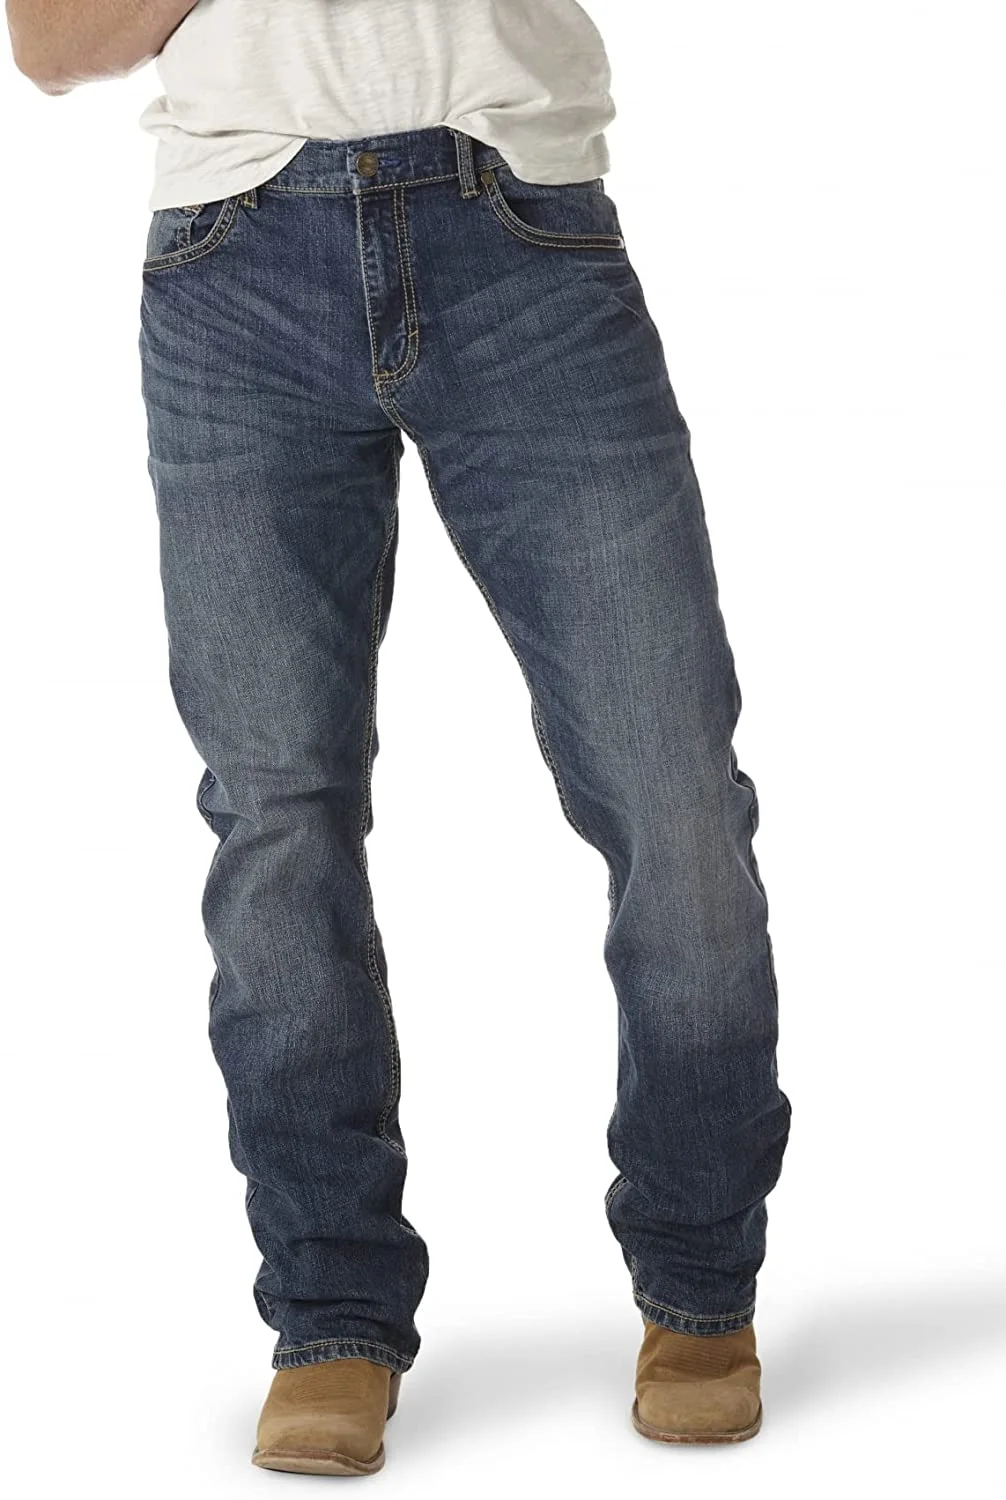 Low Rise Jeans - Bangladesh Factory, Suppliers, Manufacturers